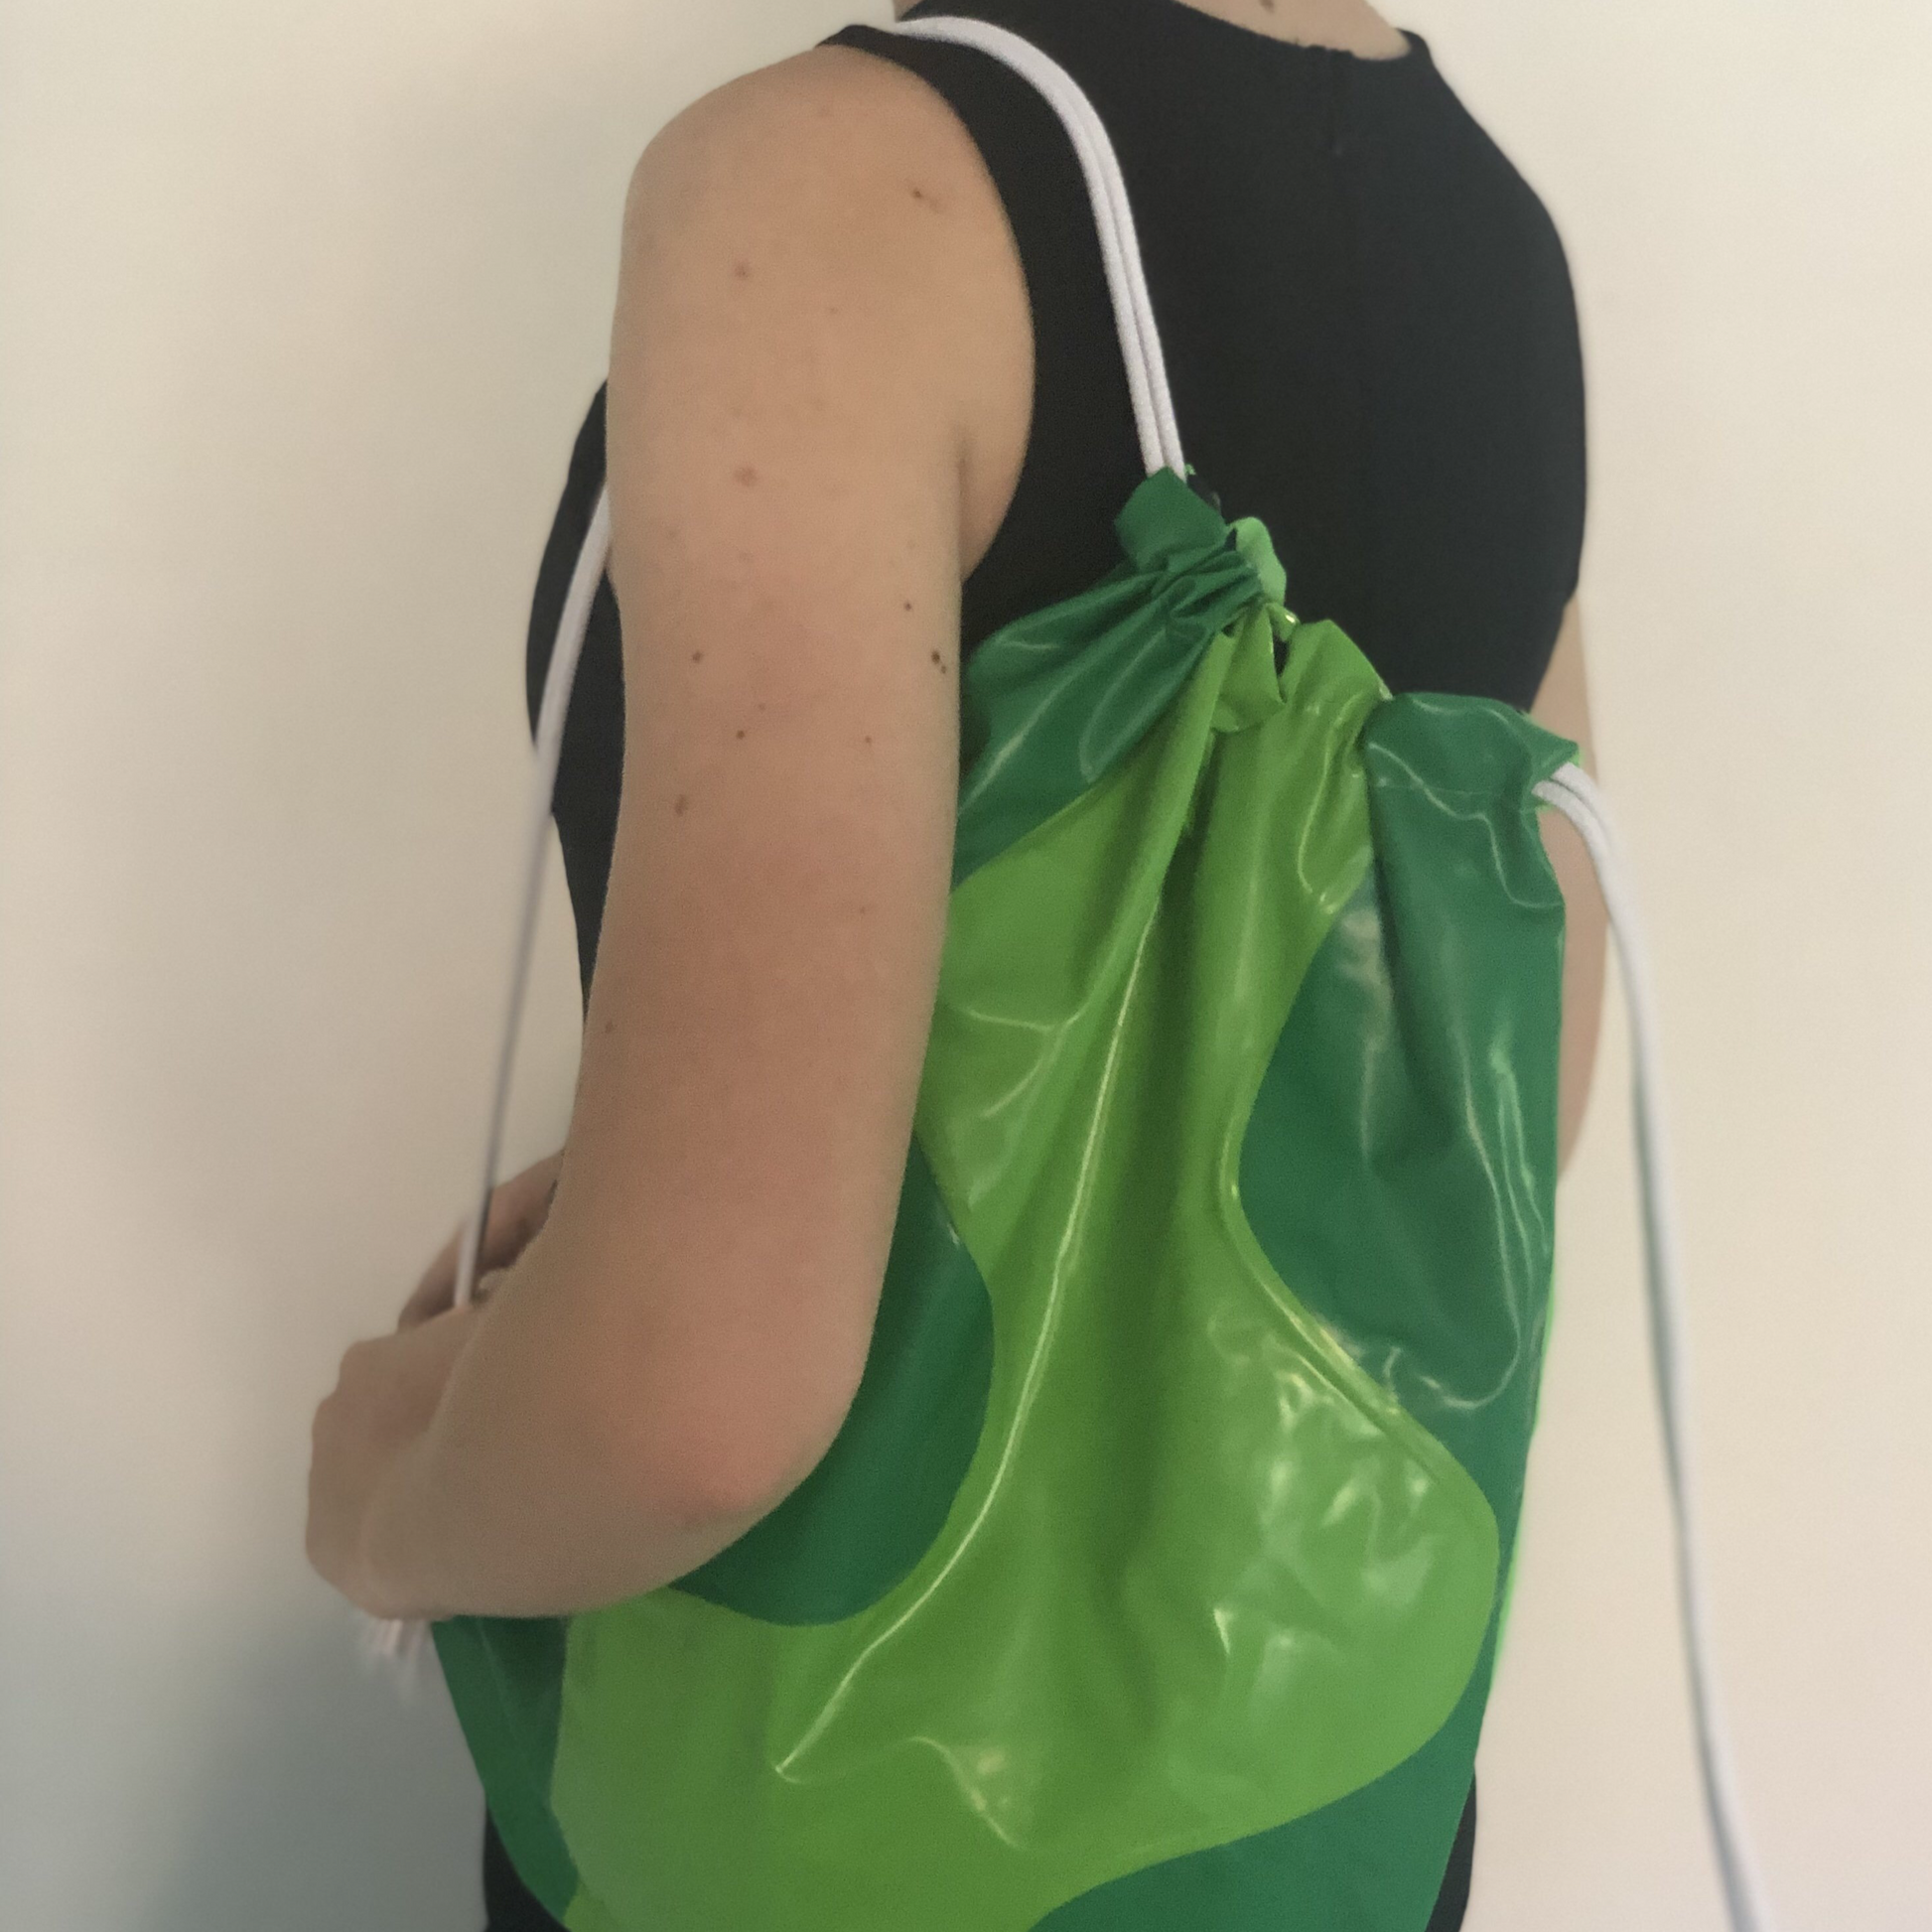 Pullcord bag ideal for swimming or sports made from recycled pool inflatables